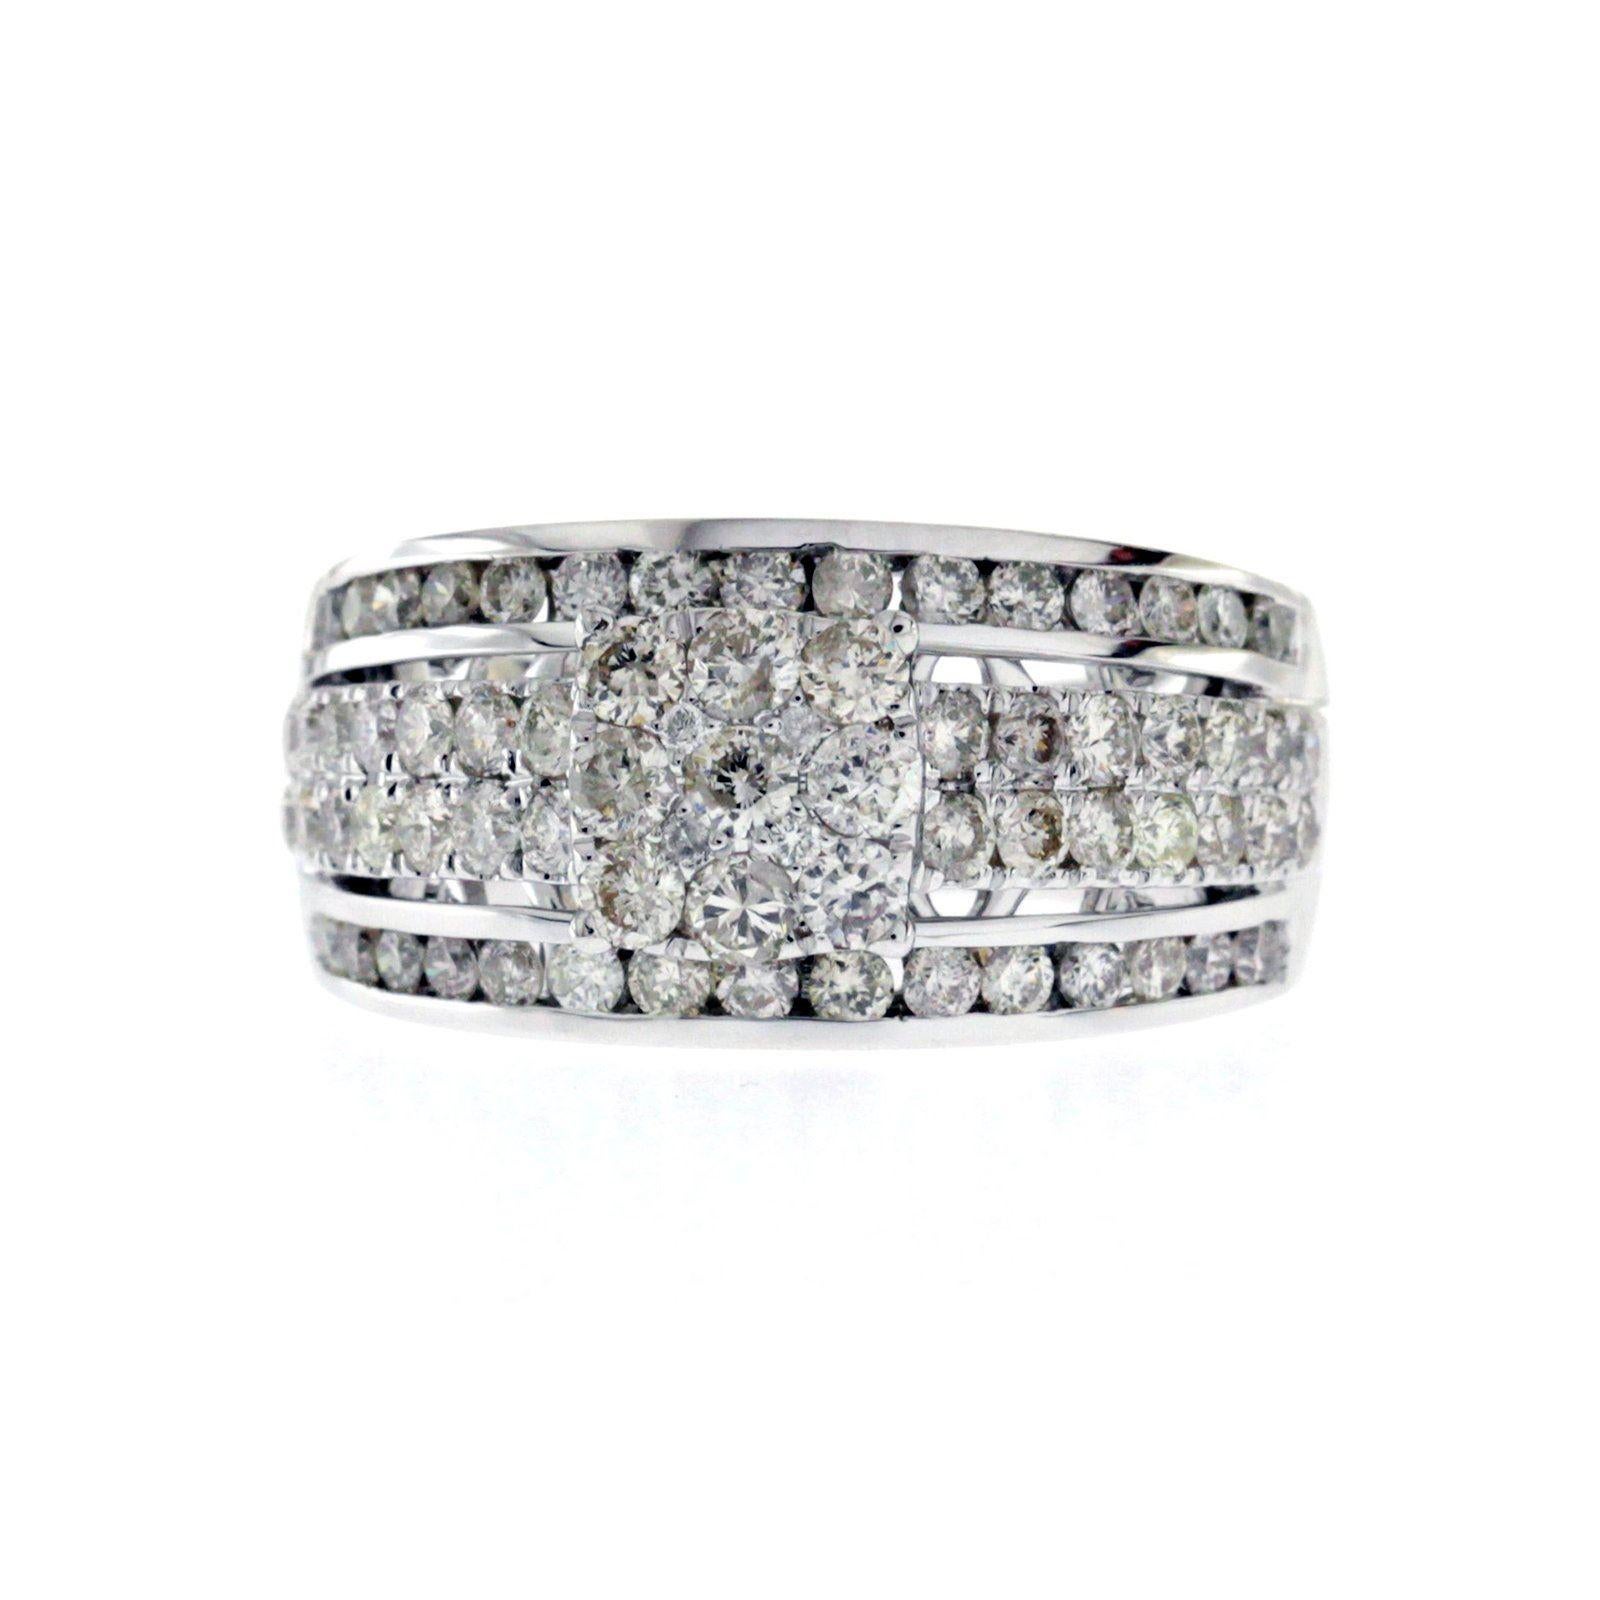 1.44 Carat Natural Diamonds G Si1 in 14 Karat White Gold Engagement Ring In New Condition For Sale In Los Angeles, CA